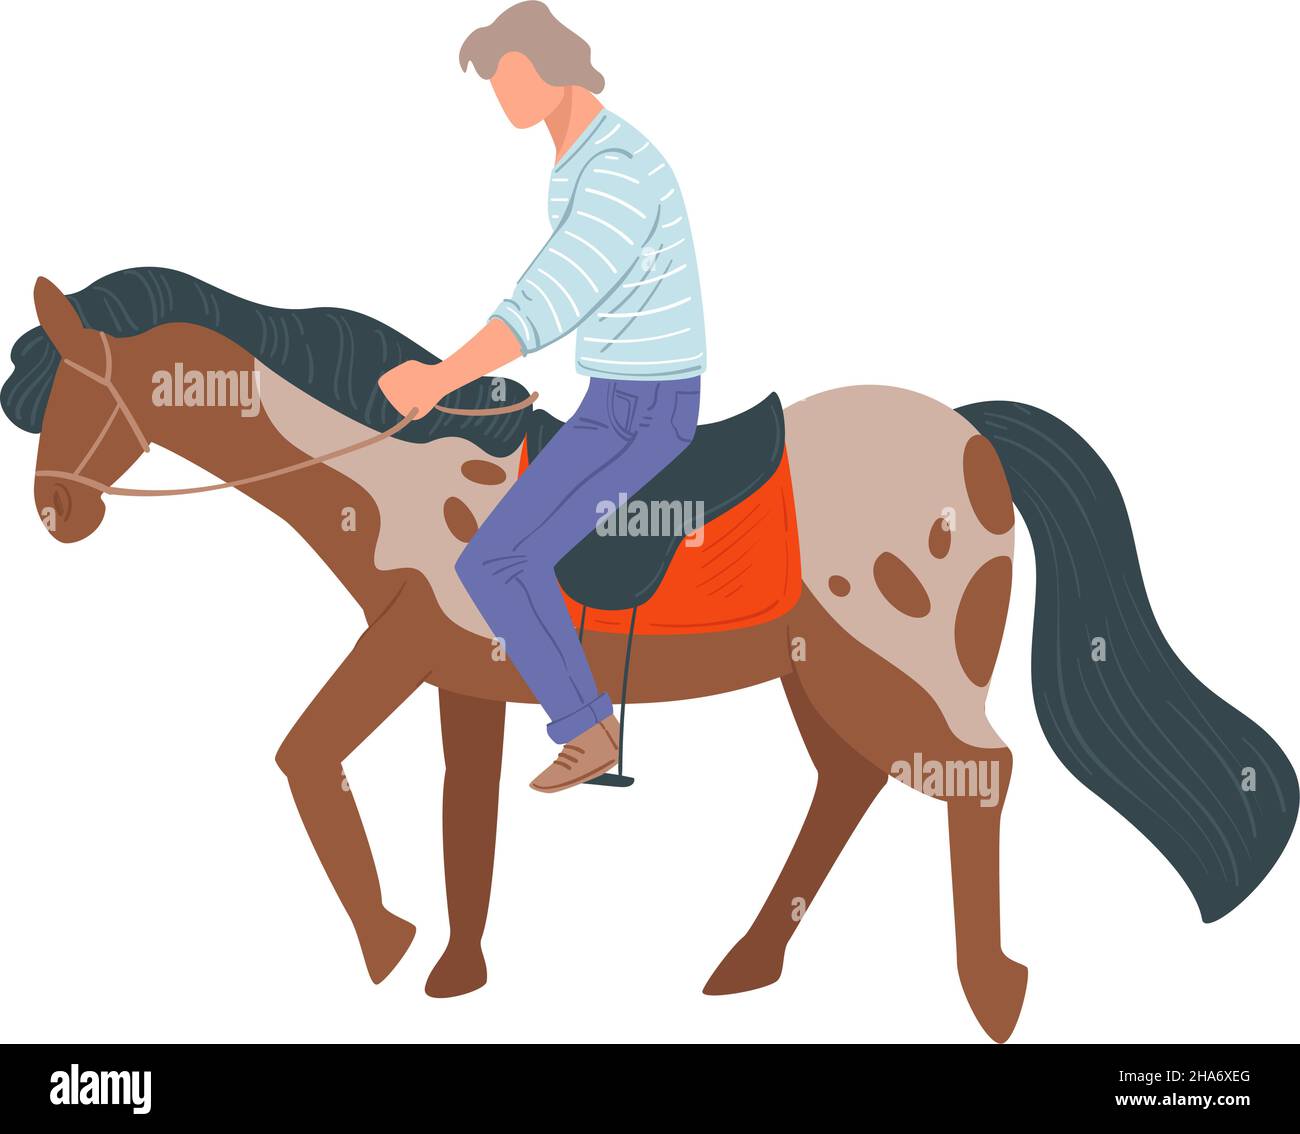 Male character on horseback training or learning to ride. Senior man in saddle preparing for sportive competition. Hobby or relaxation for personage. Stock Vector